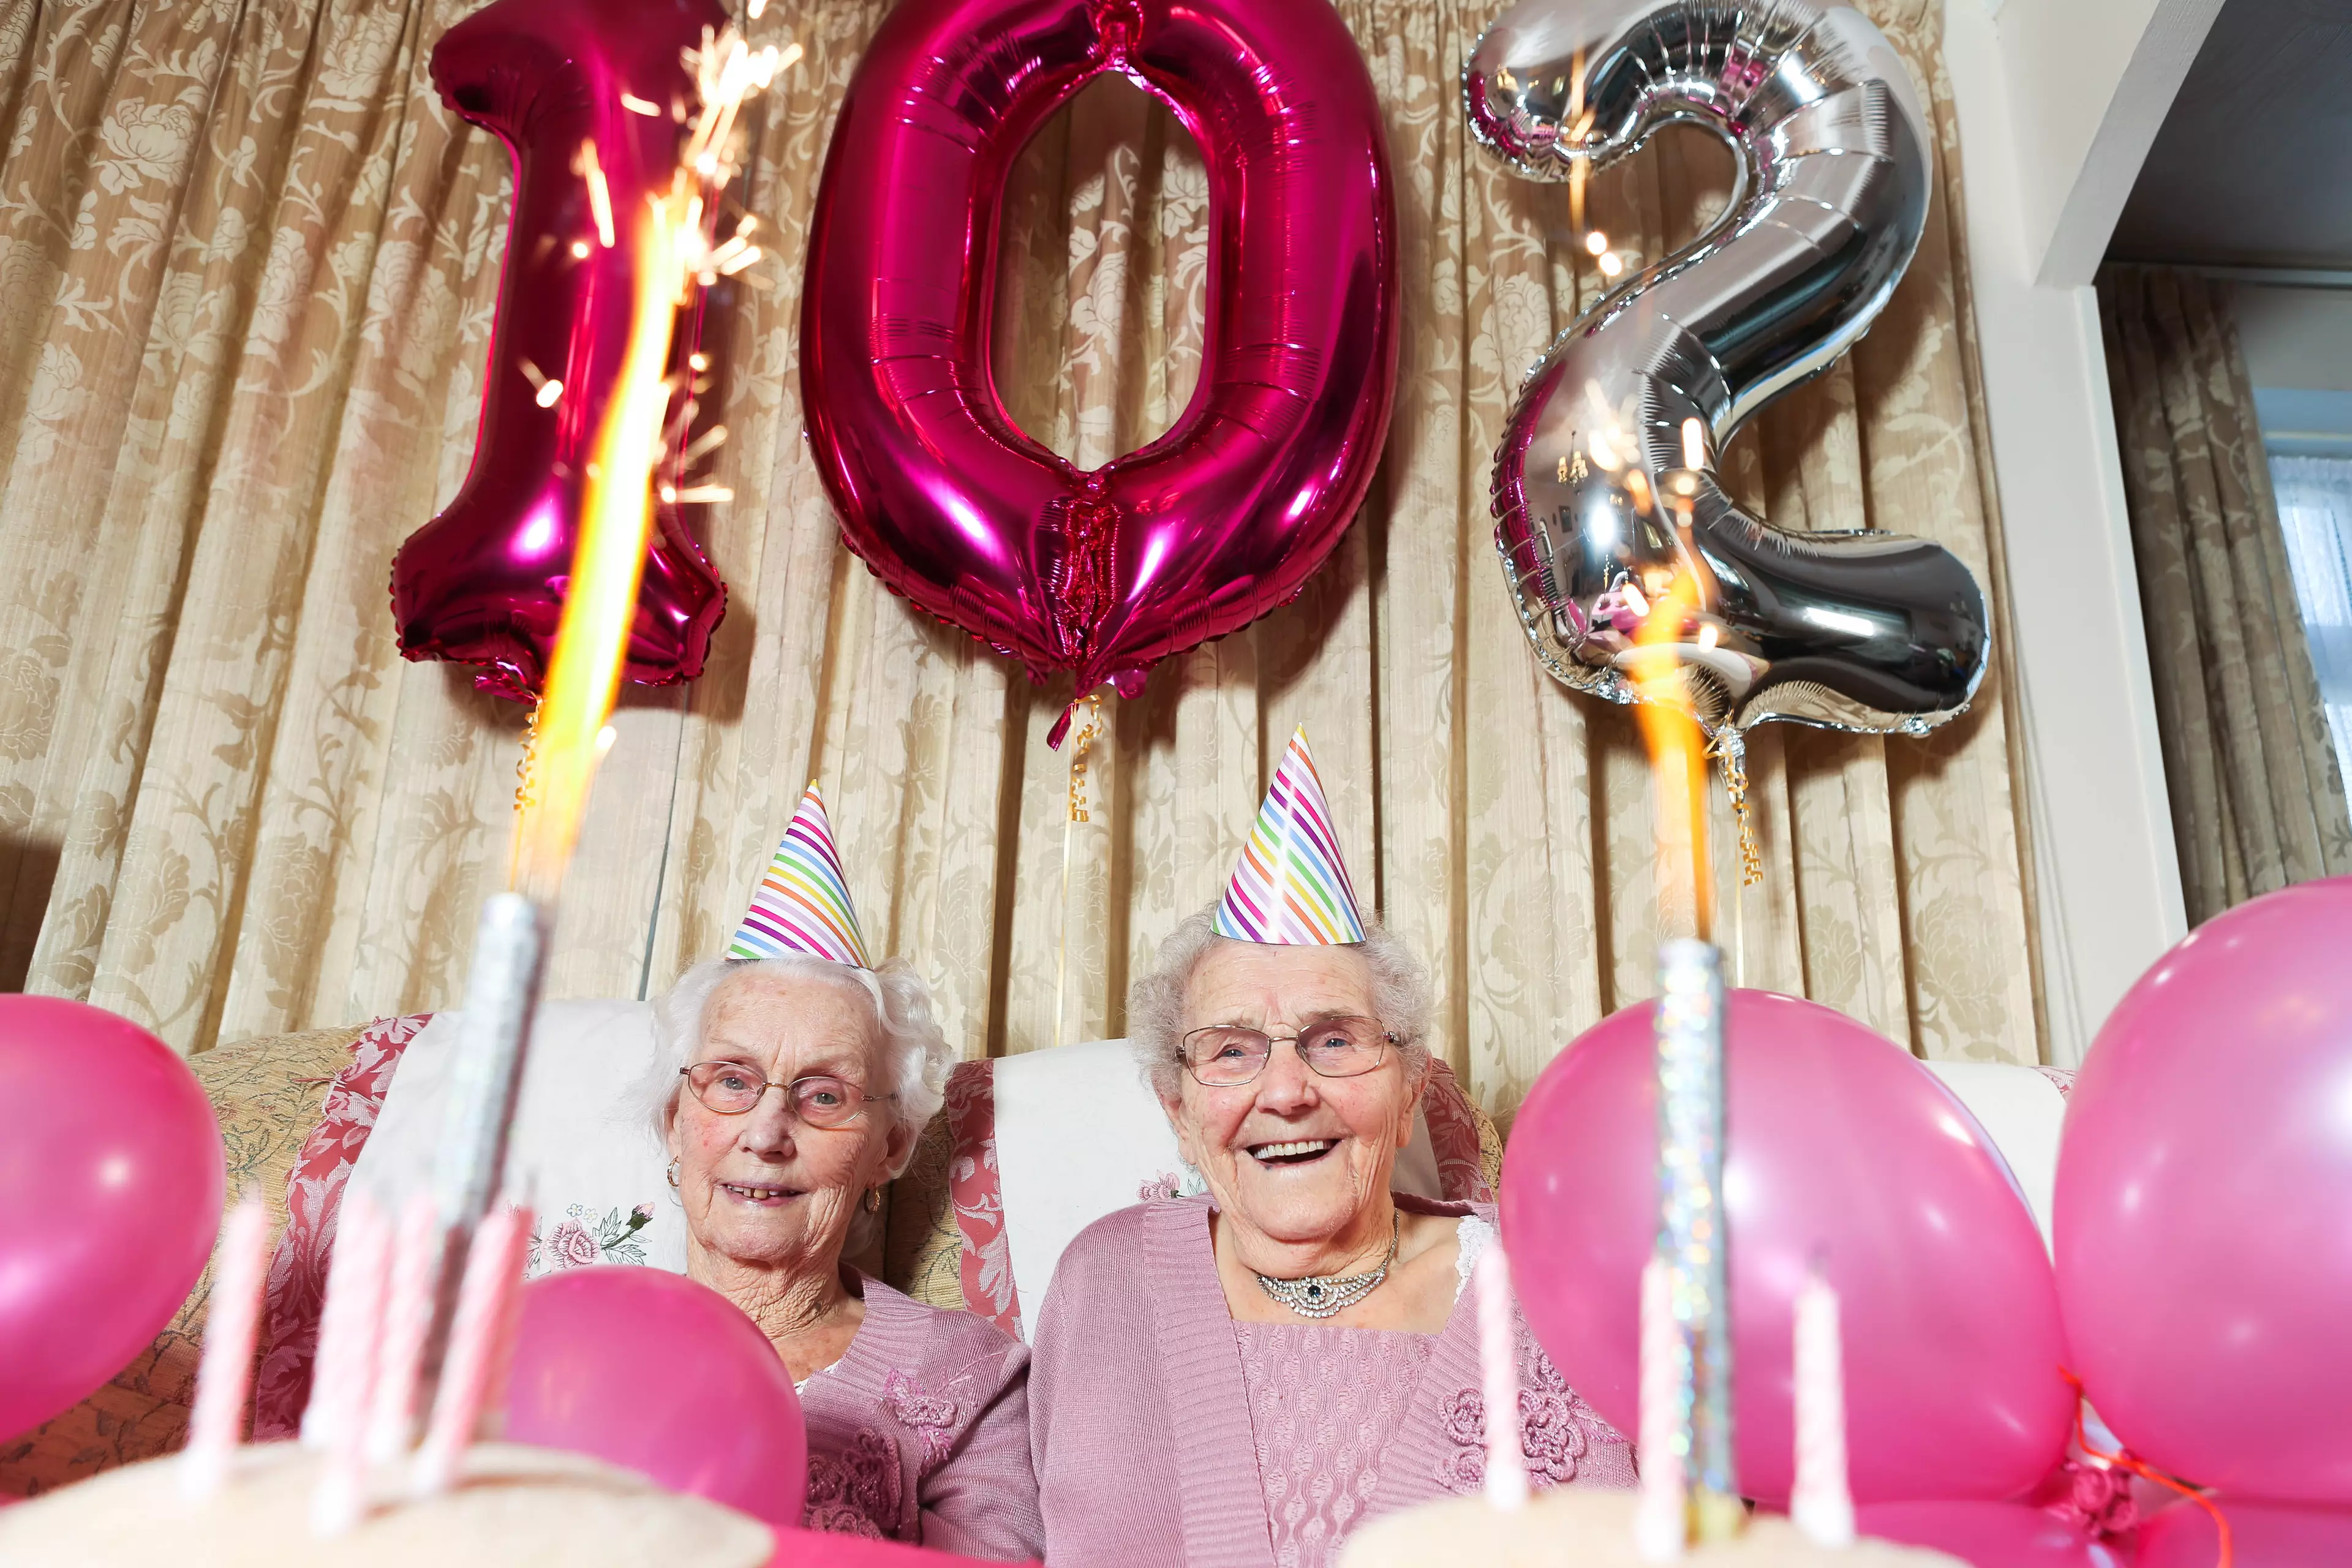 Irene and Phyllis are celebrating their 102nd birthday.